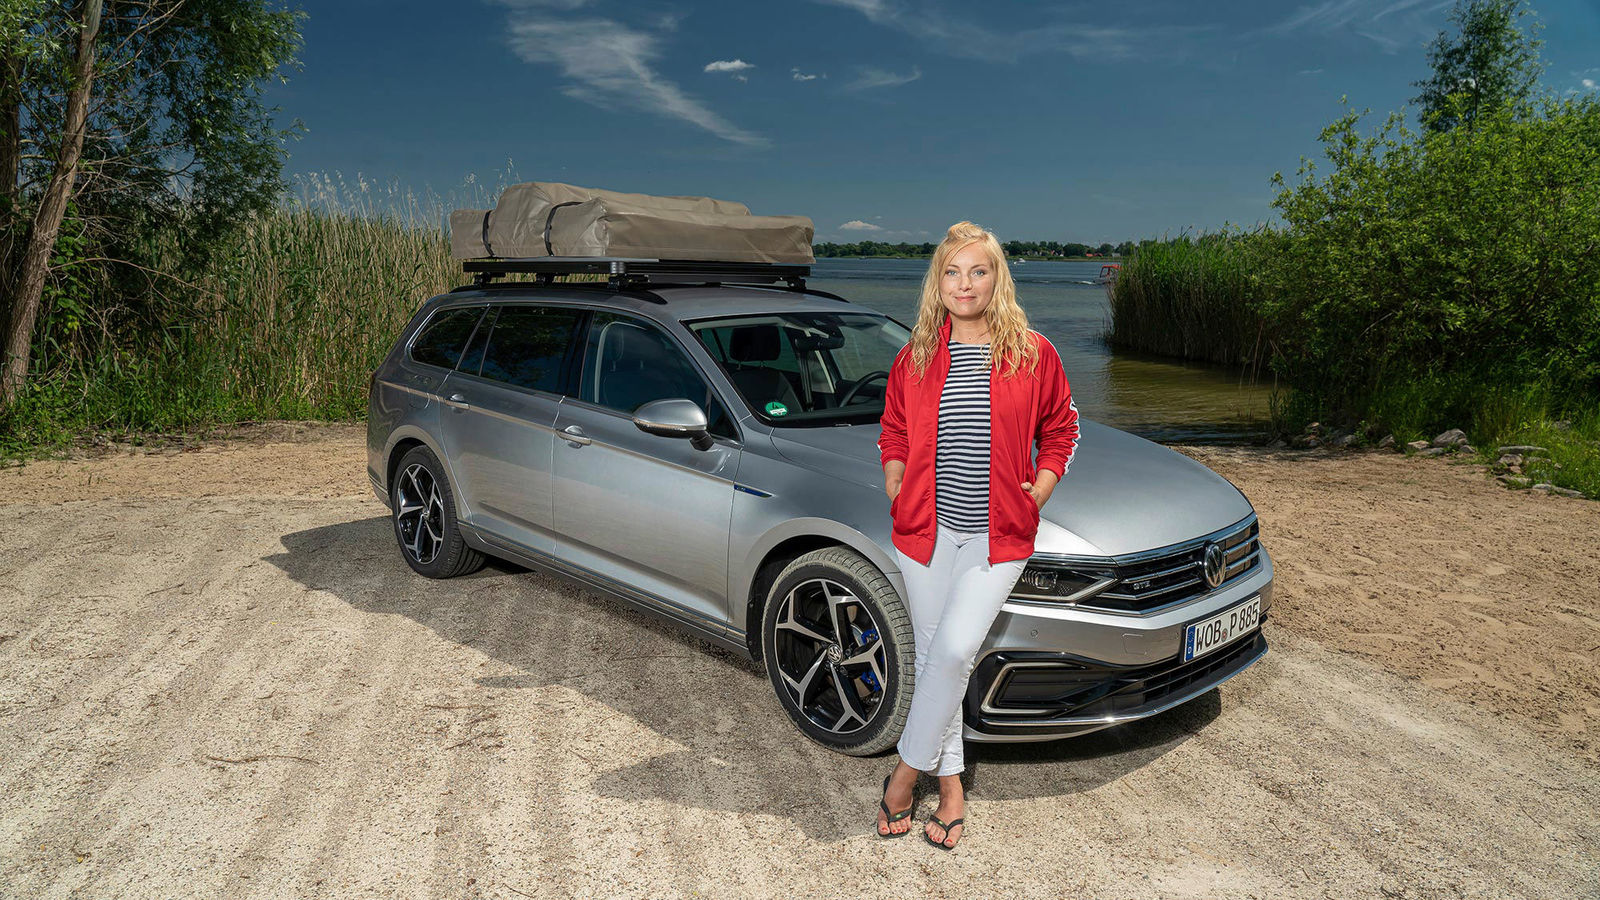 Story: Mecklenburg can be so beautiful – with Nadja Uhl and the Passat GTE Variant